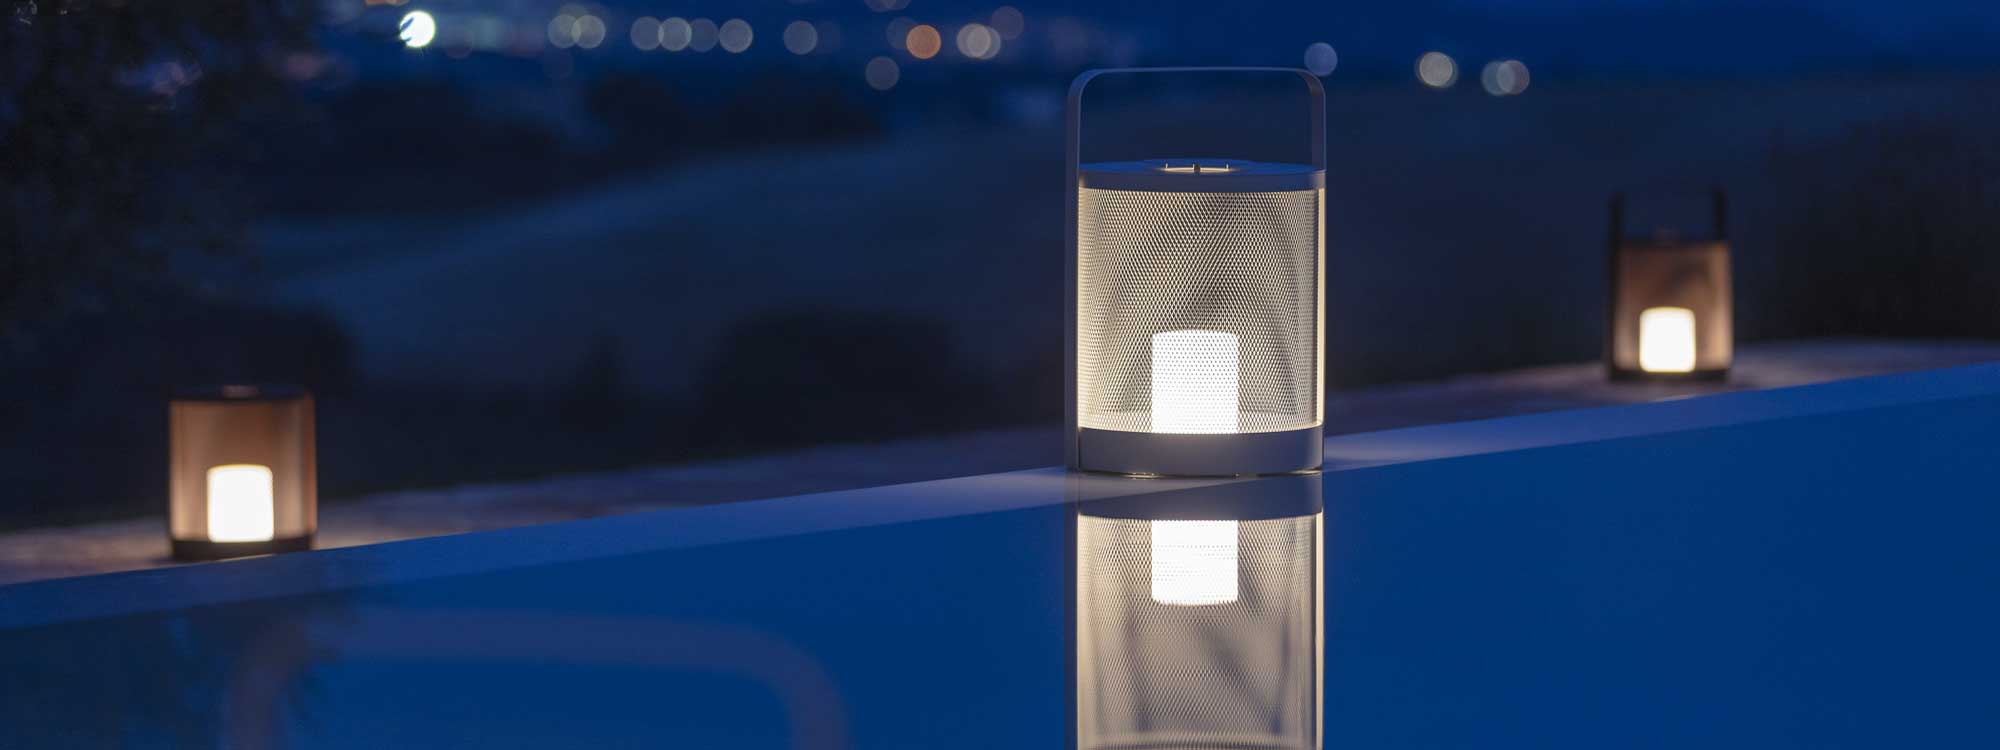 Luci portable garden lights around swimming pool at nighttime